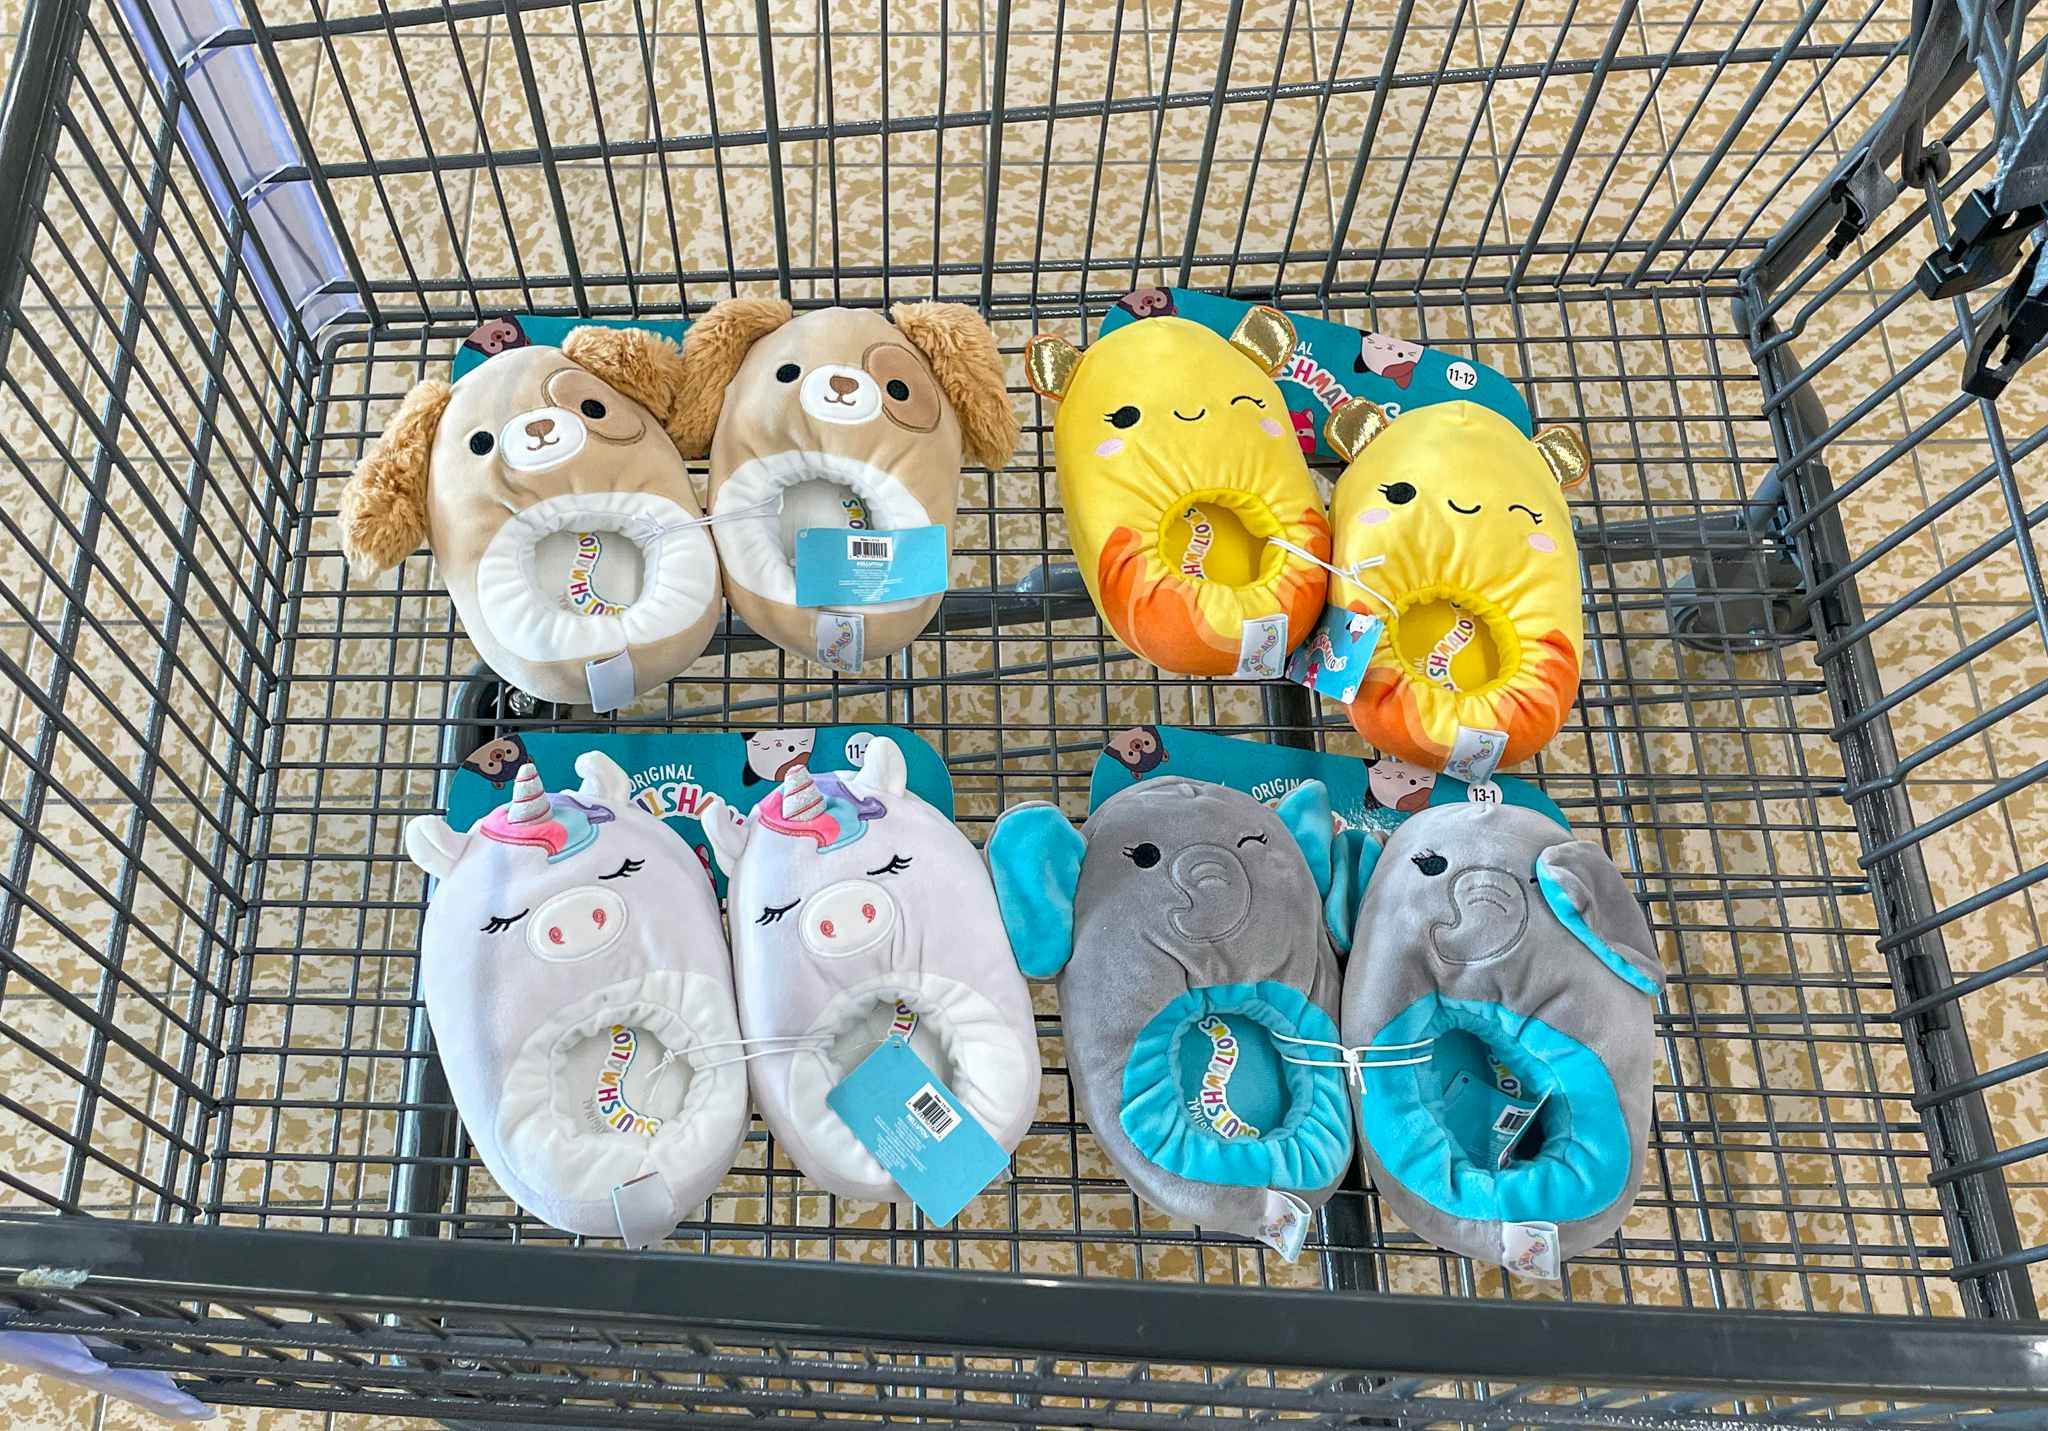 squishmallow slippers in a cart at aldi